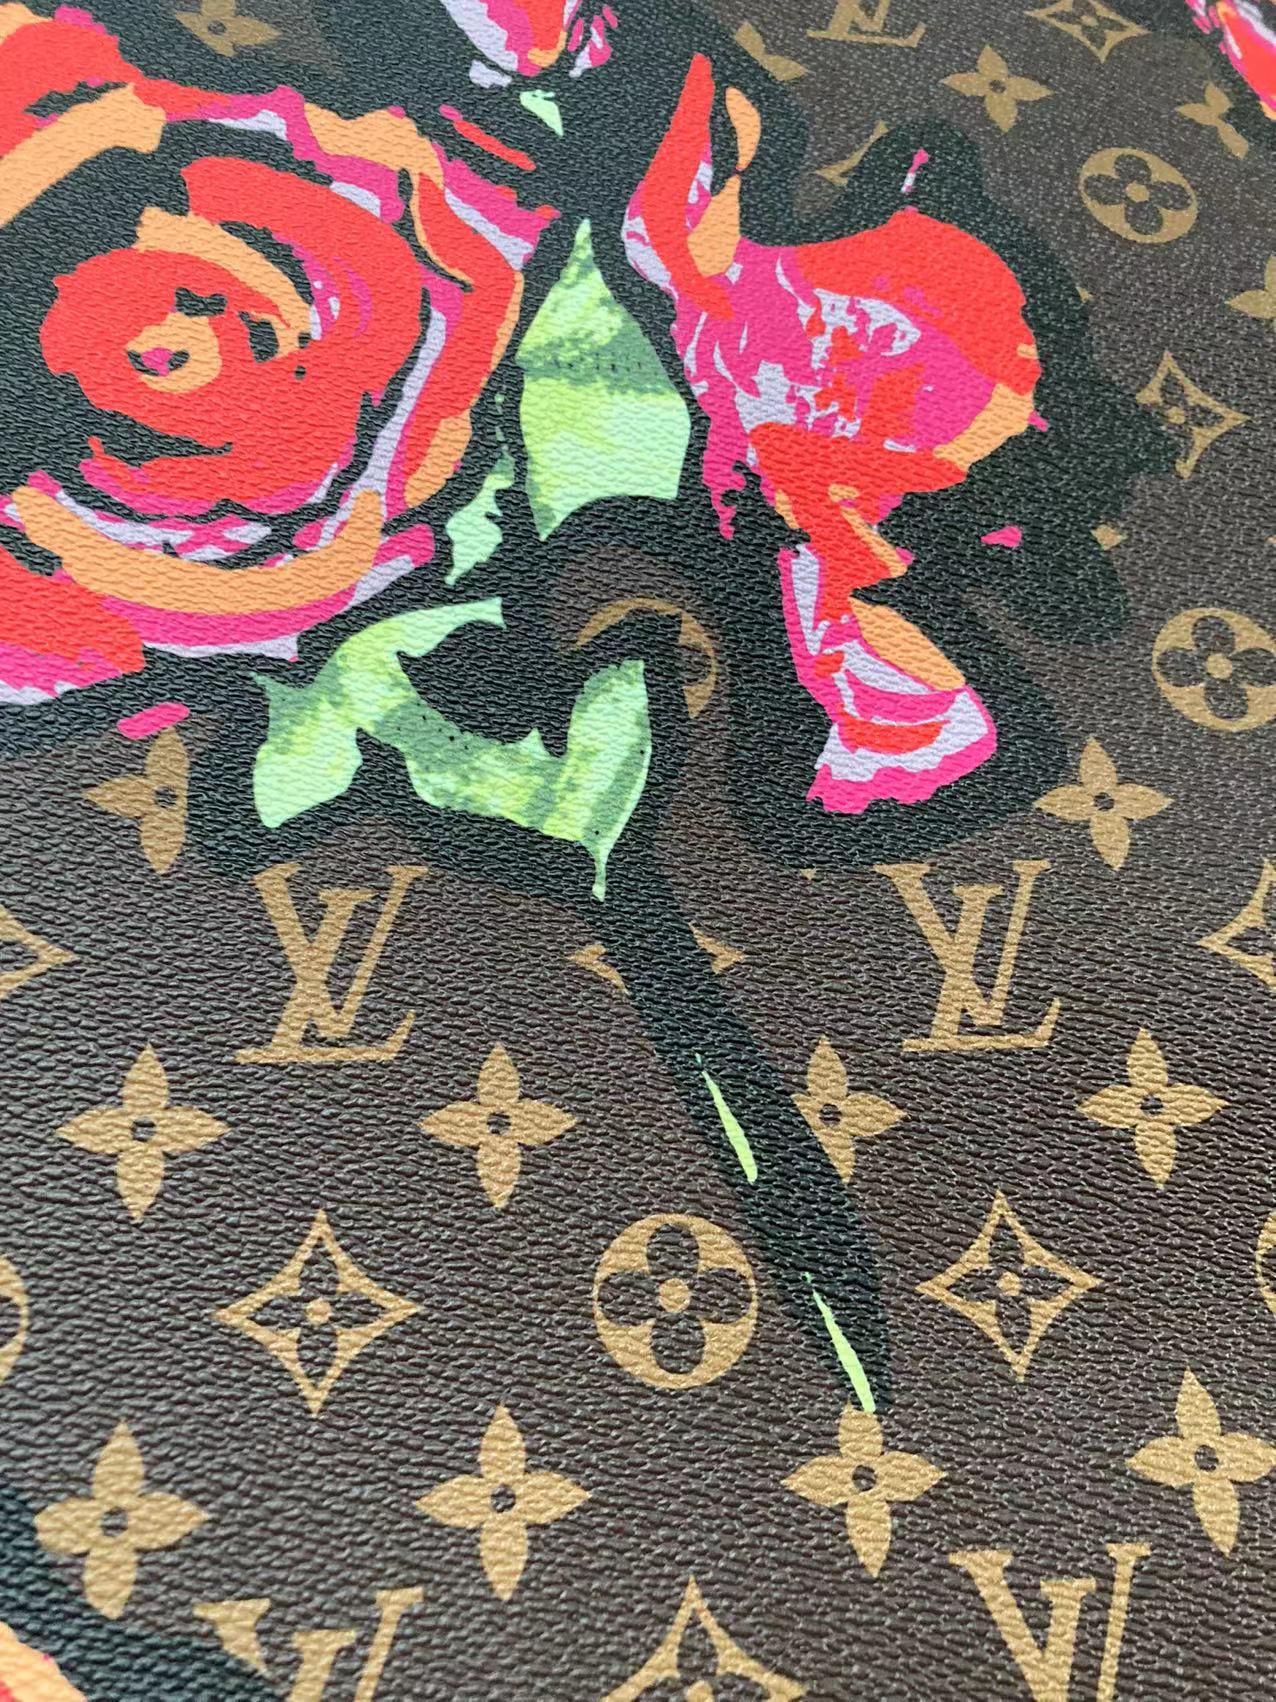 Brown LV Big Flower Faux Leather Fabric Custom Material for Sneaker Car Upholstery